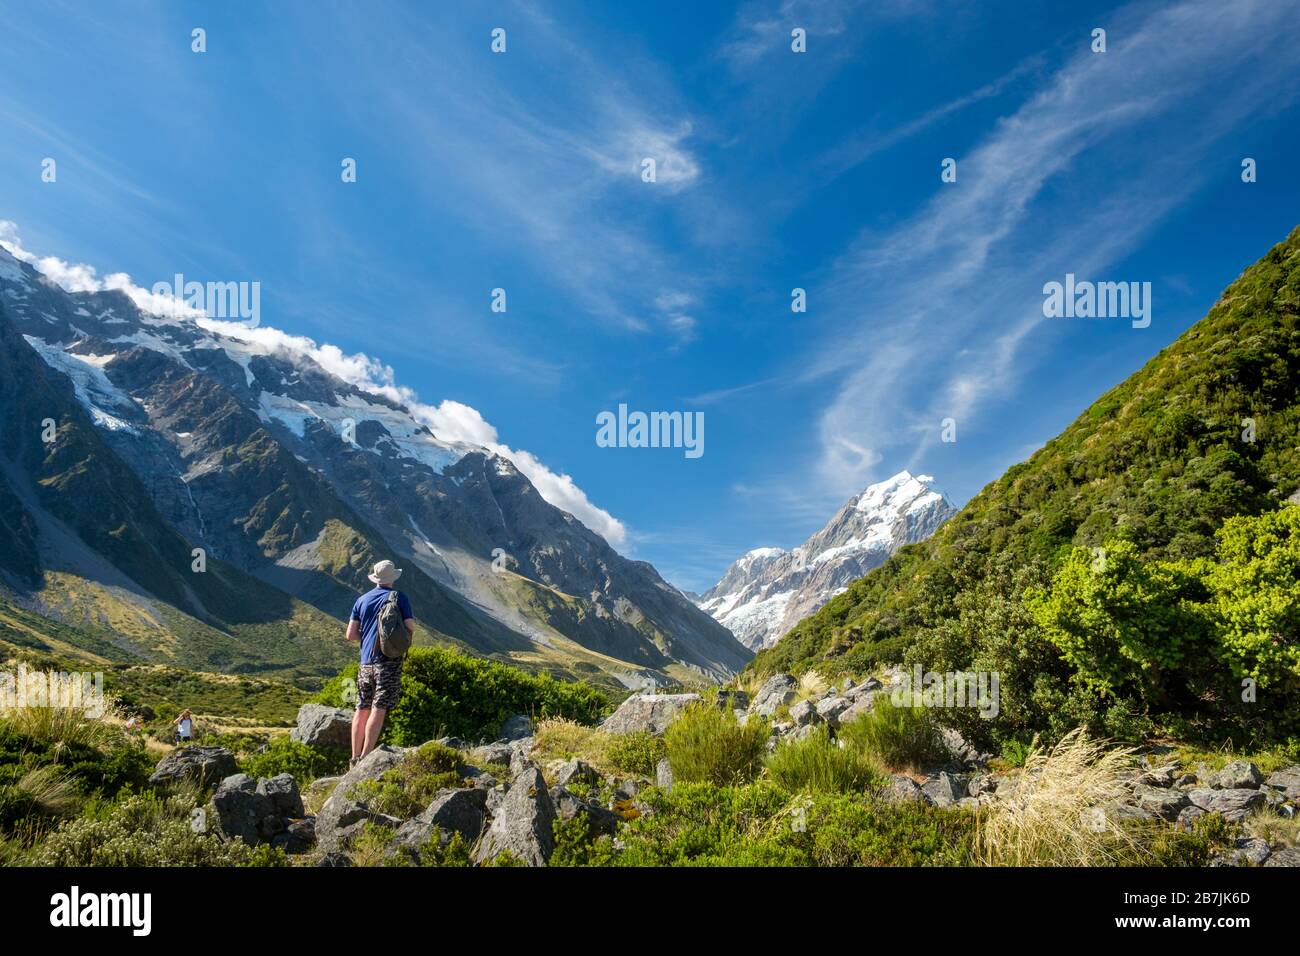 Man on Grassy hill with Glaciers and snow-topped mountain, Aoraki/Mount Cook National Park, South Island, New Zealand Stock Photo